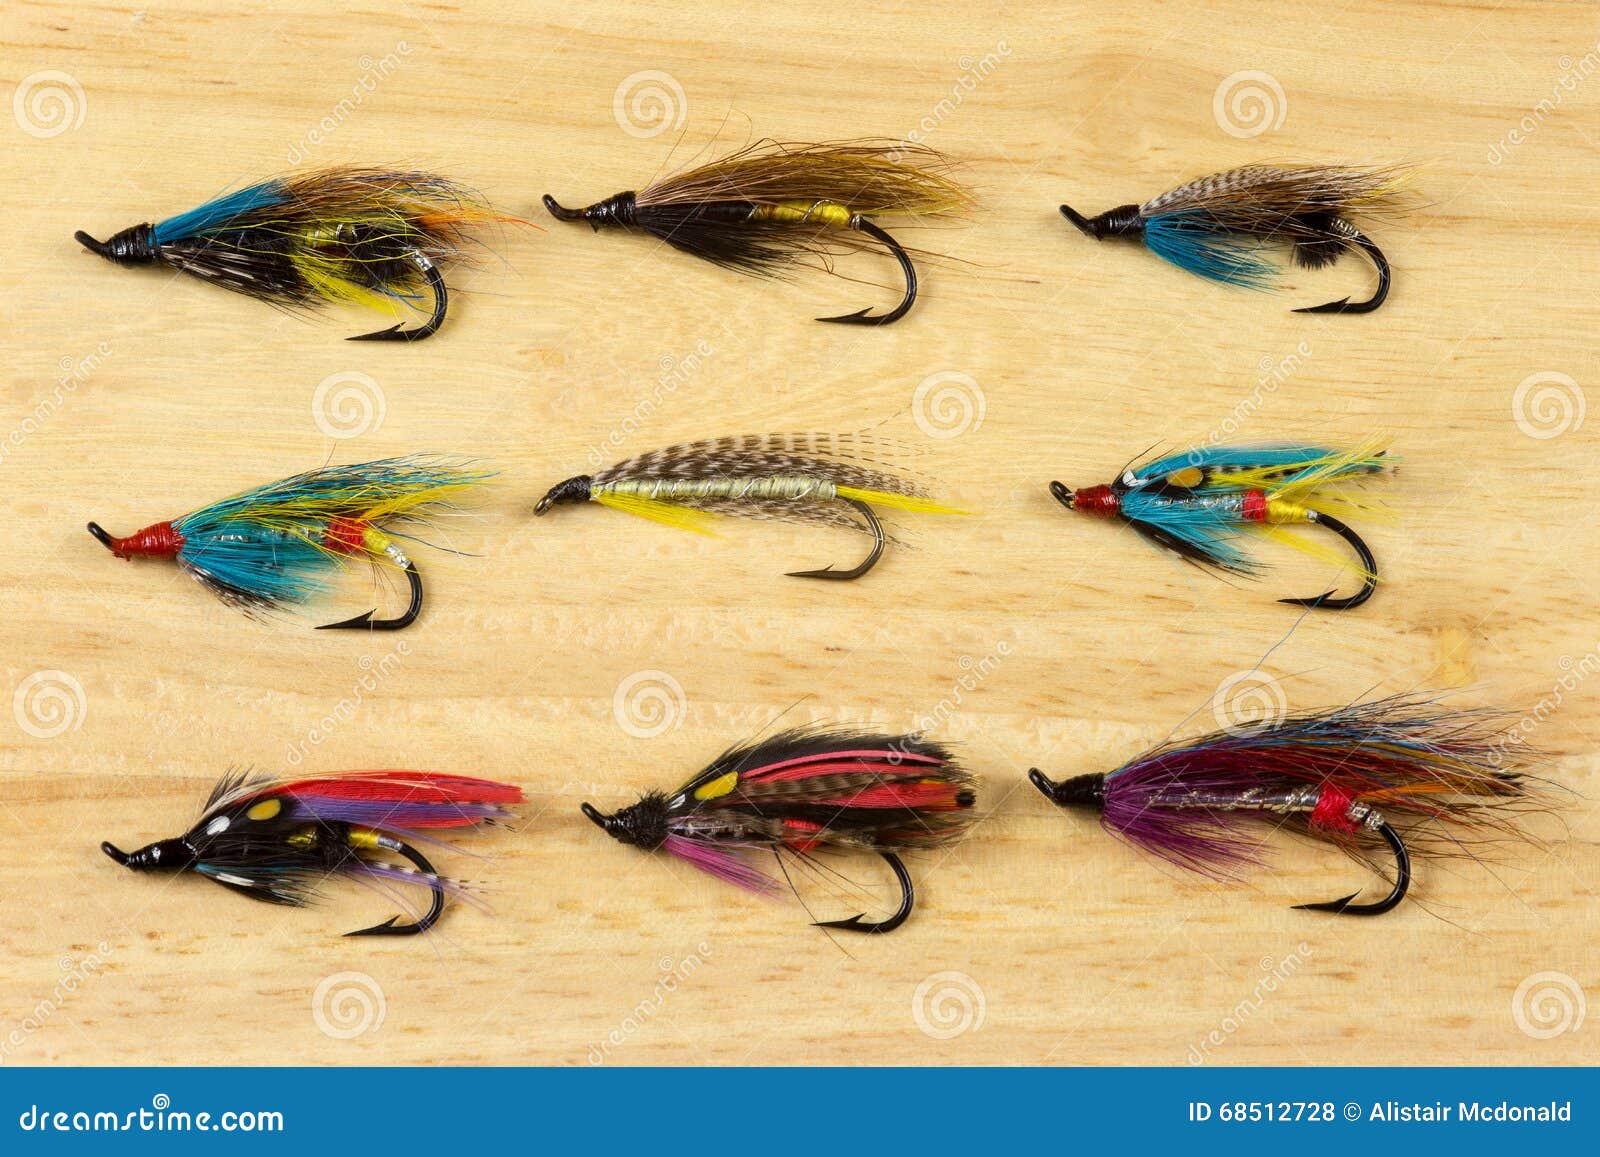 https://thumbs.dreamstime.com/z/traditional-salmon-fishing-flies-wooden-background-arranged-table-68512728.jpg